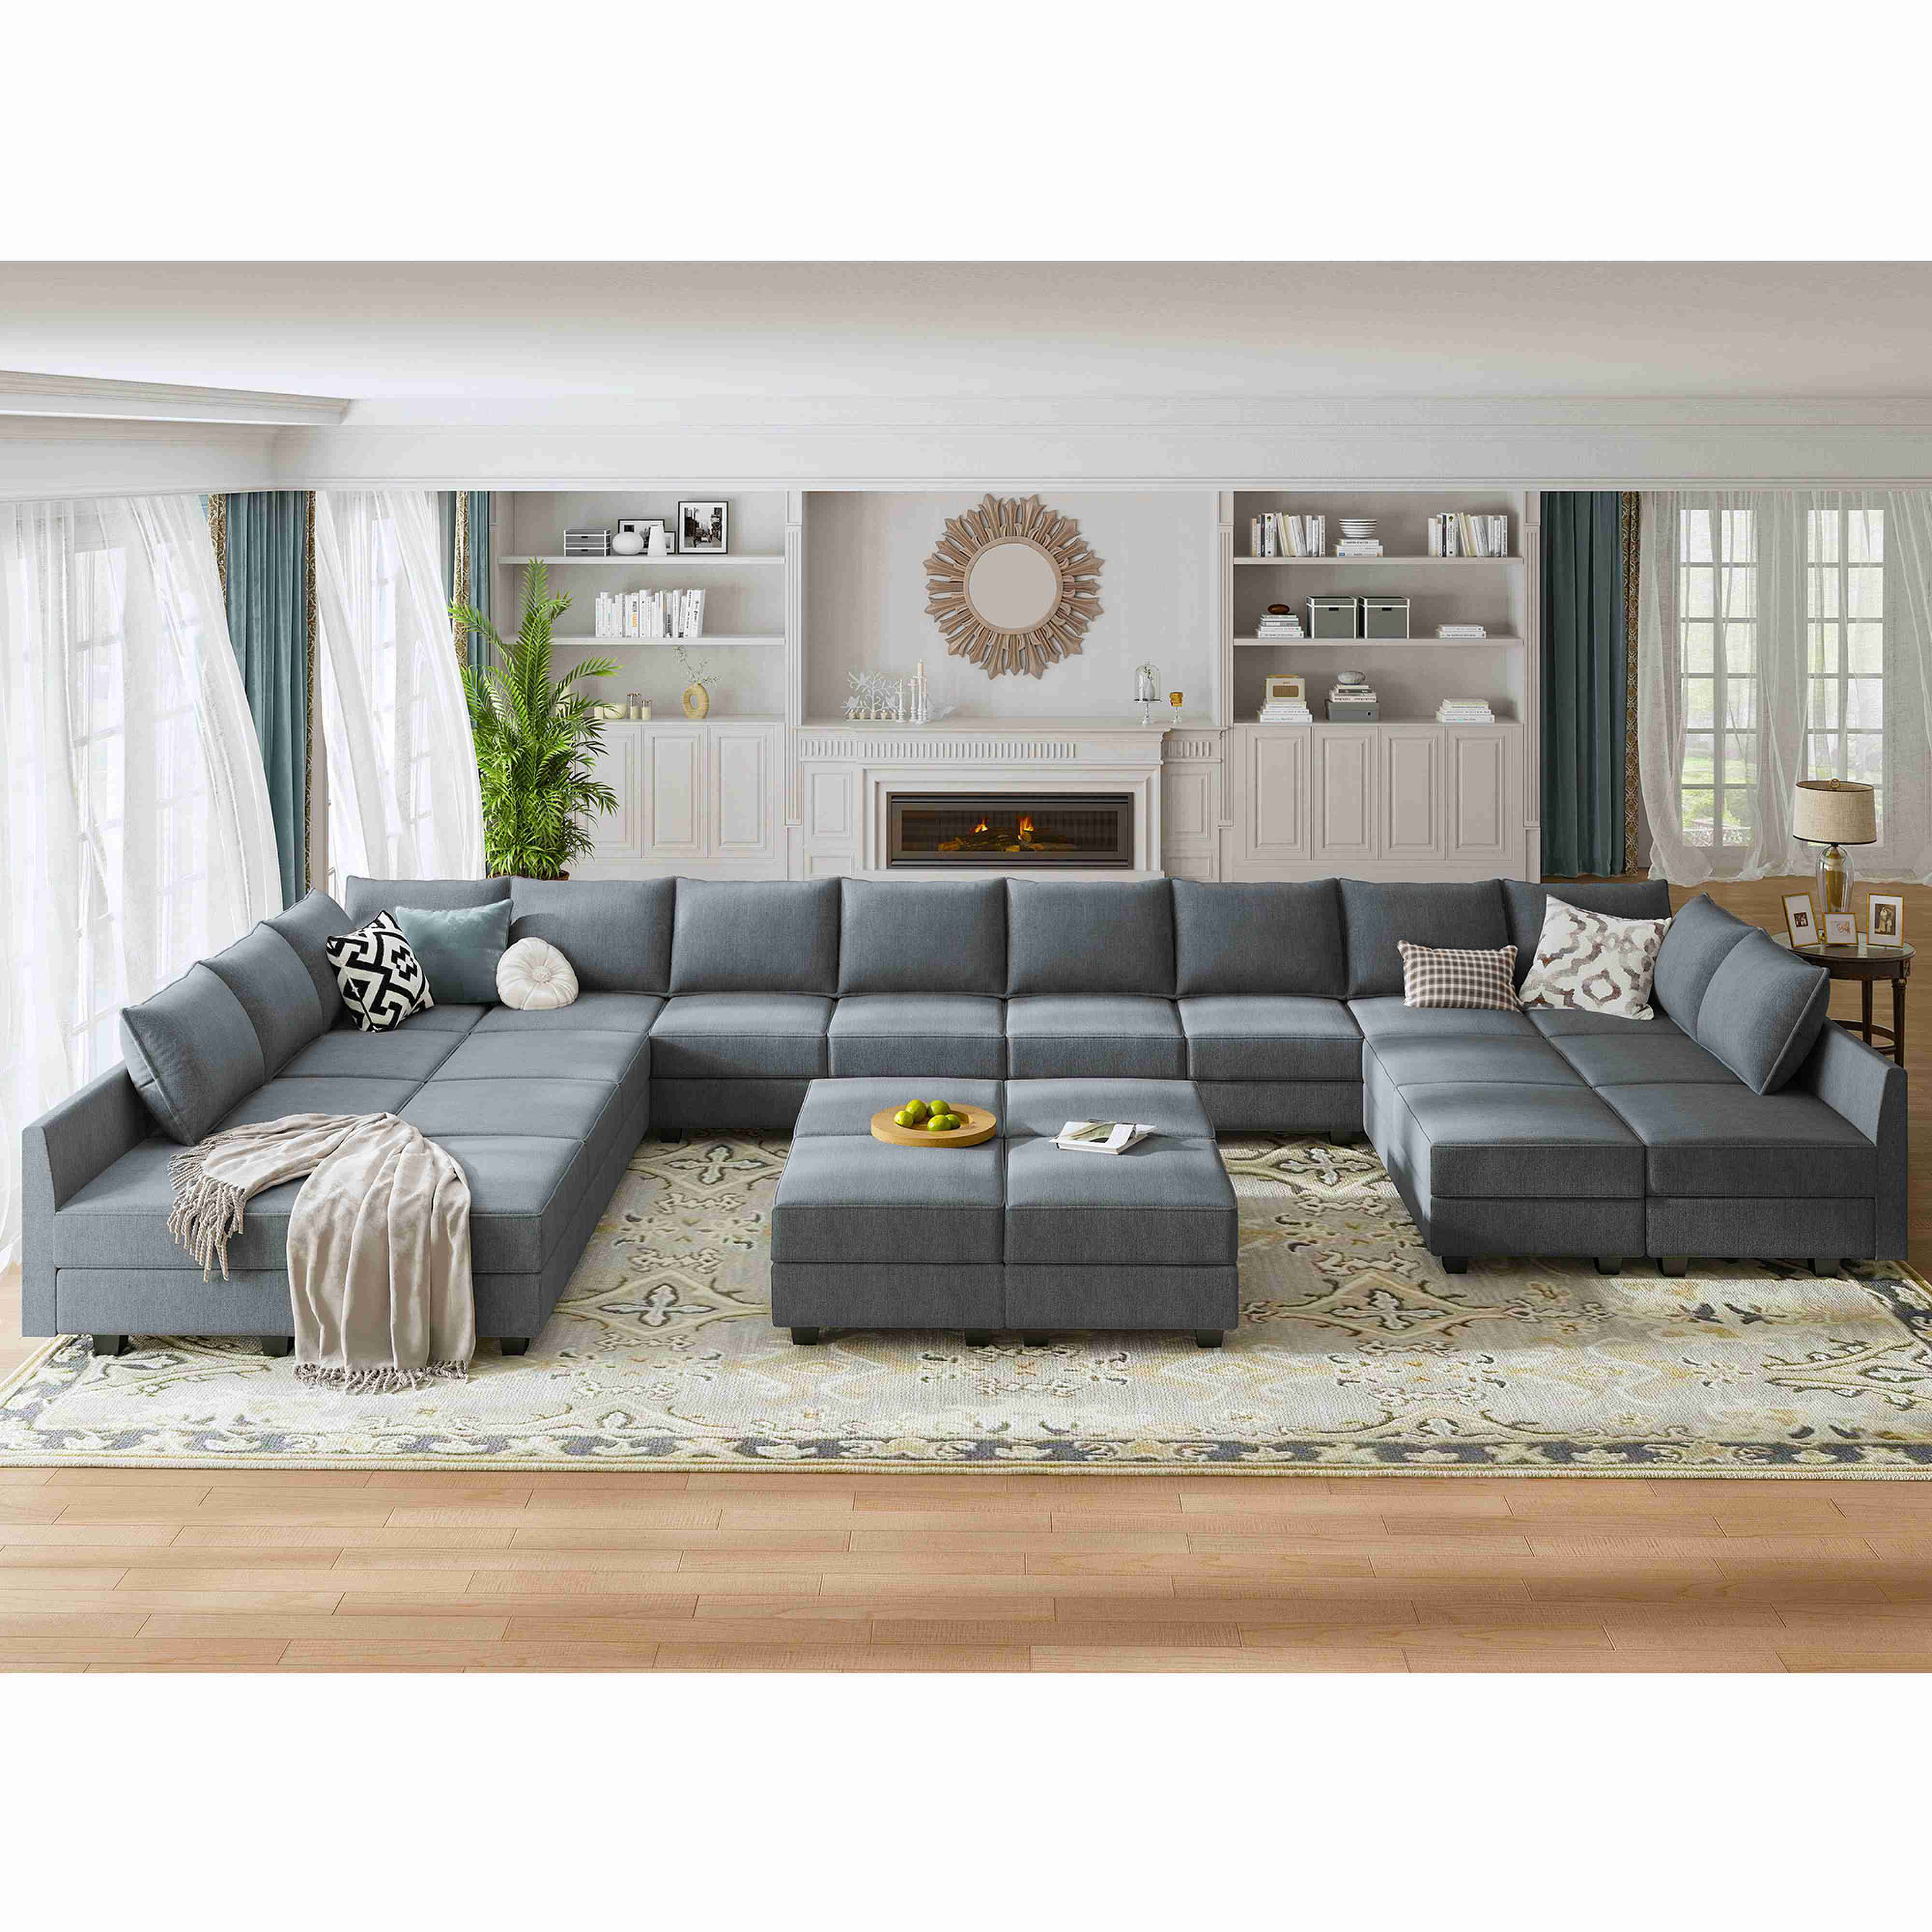 Sectional Sofa Couch For Living Room